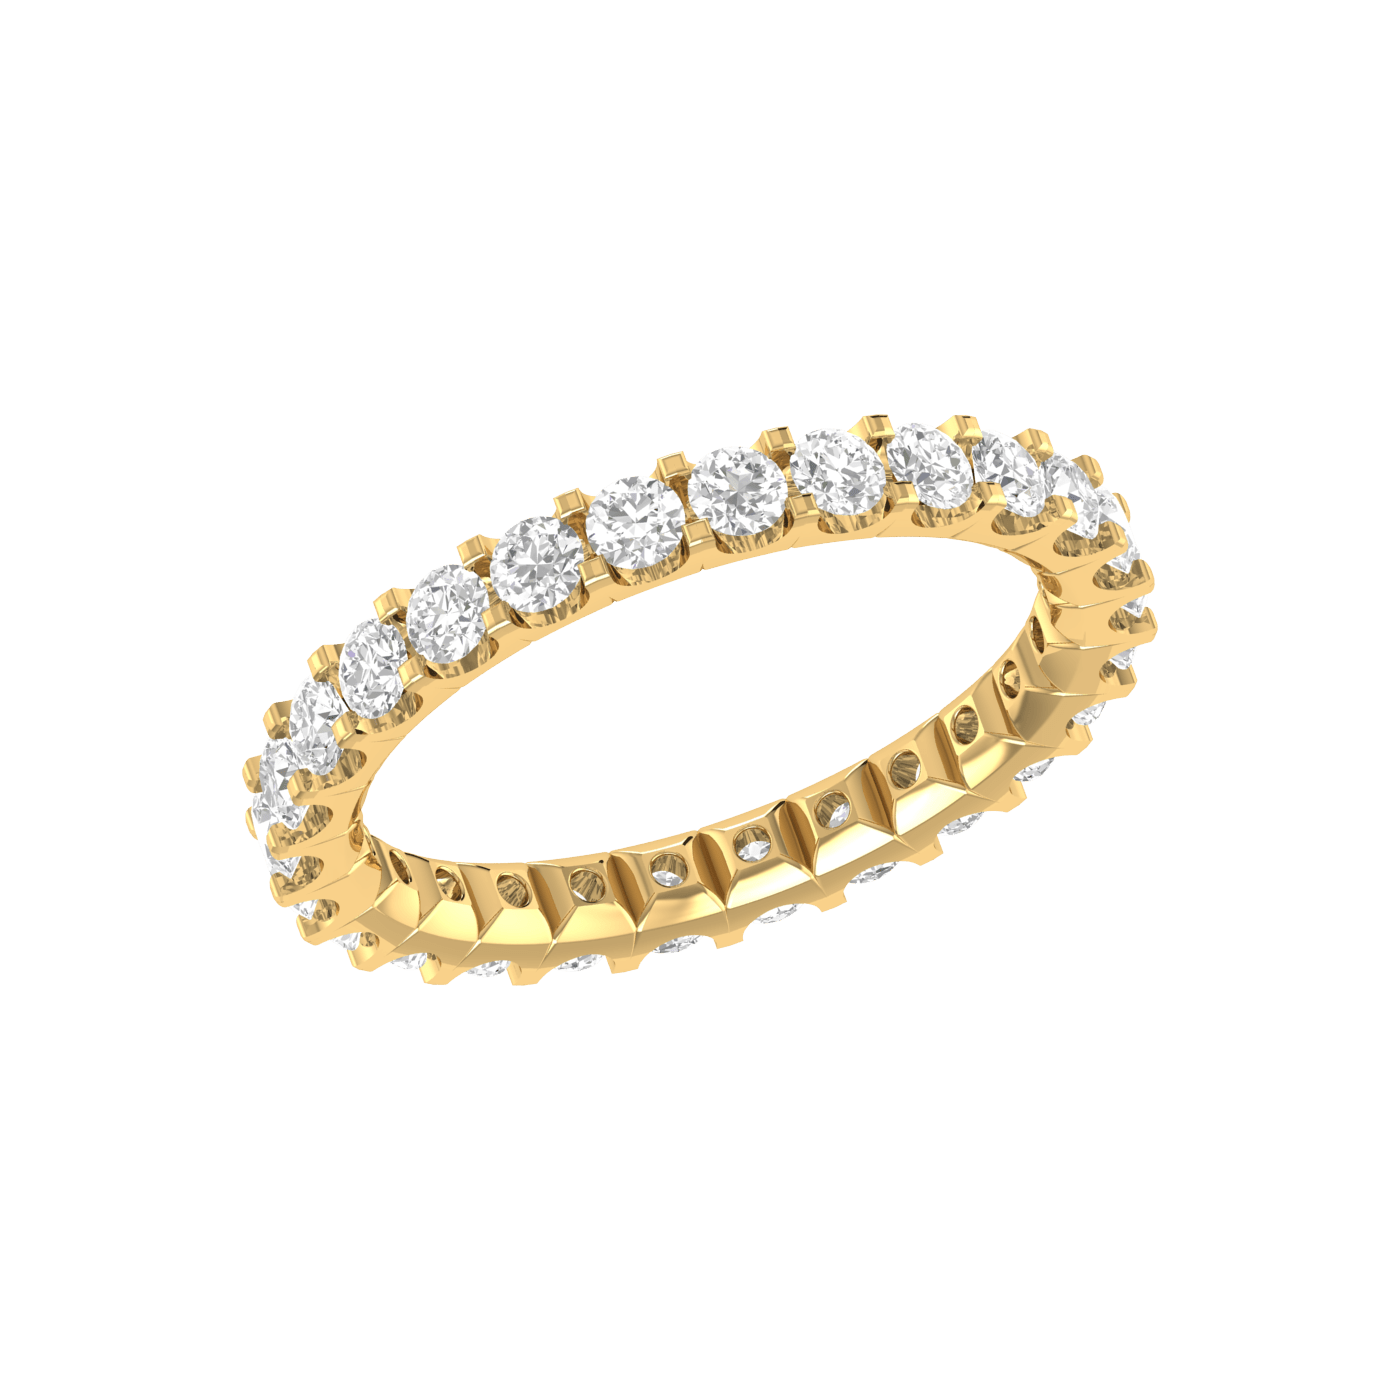 Ross Diamond Band For Him Online Jewellery Shopping India | Yellow Gold 14K  | Candere by Kalyan Jewellers